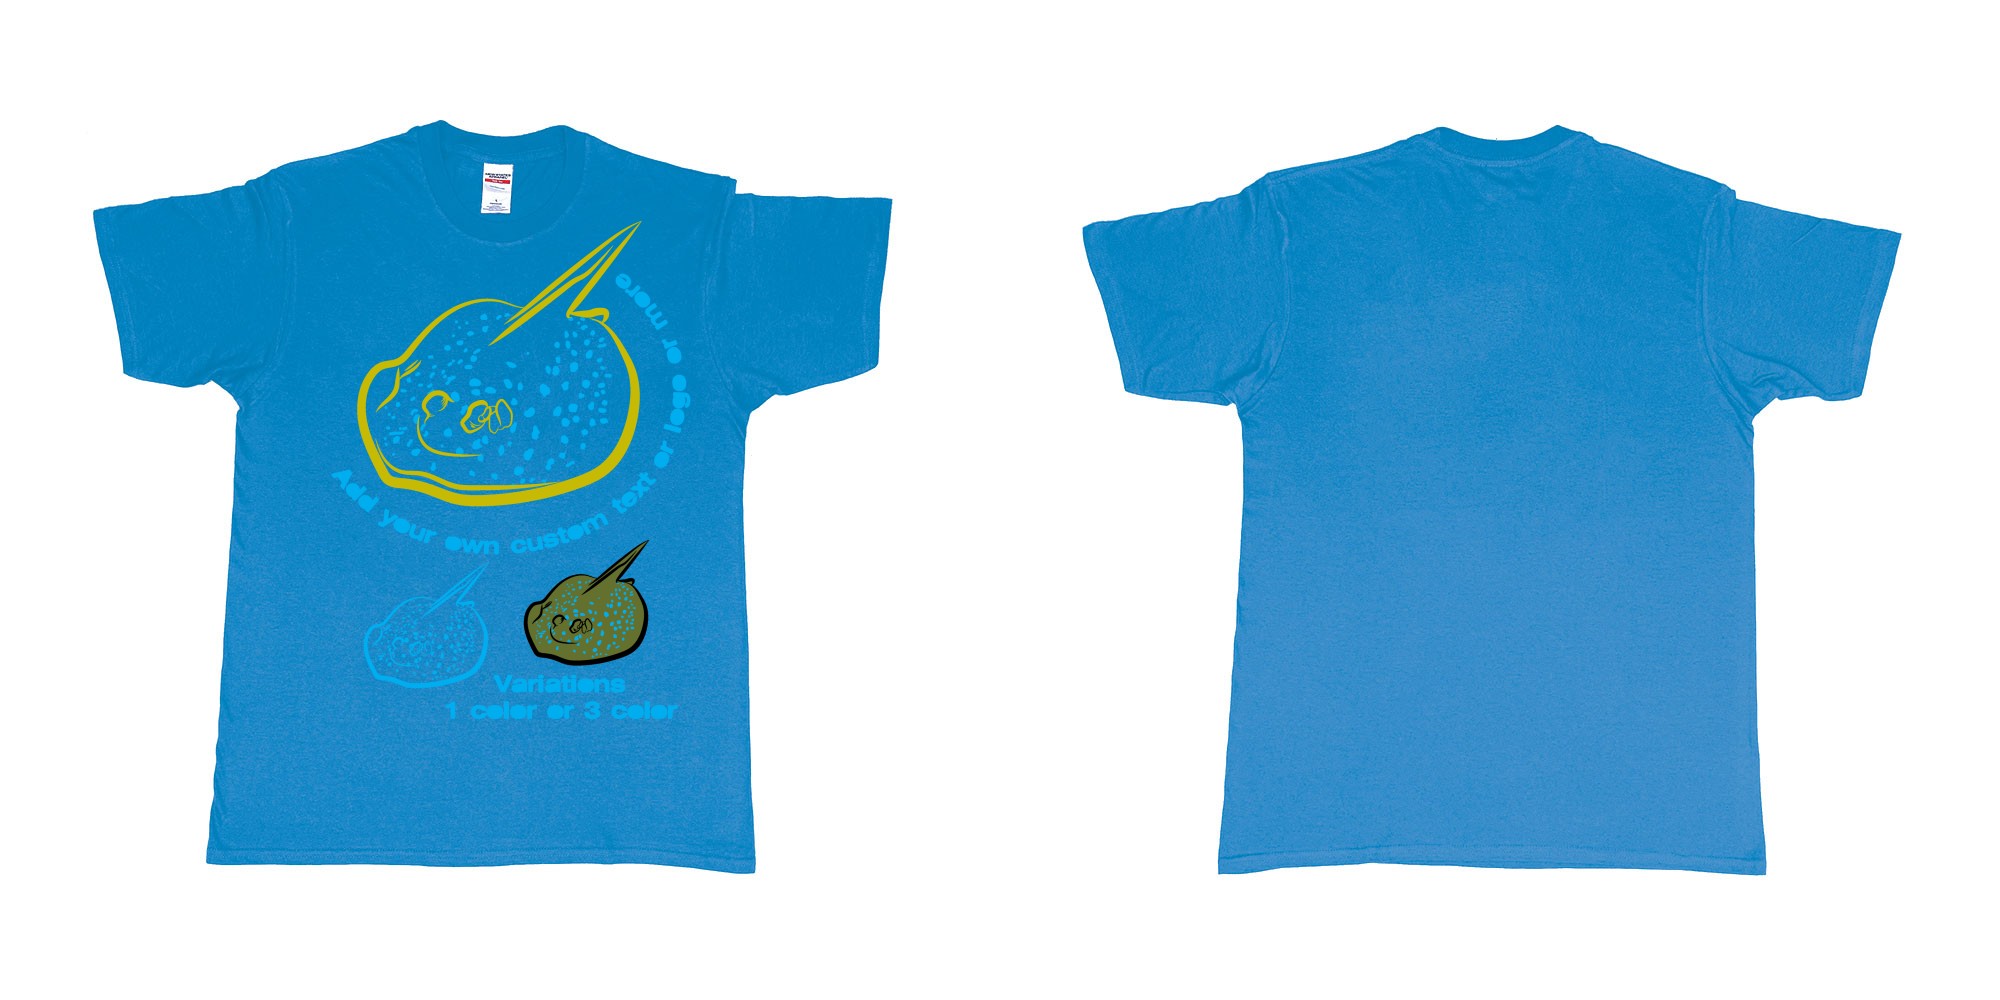 Custom tshirt design blue spotted stingray in fabric color sapphire choice your own text made in Bali by The Pirate Way